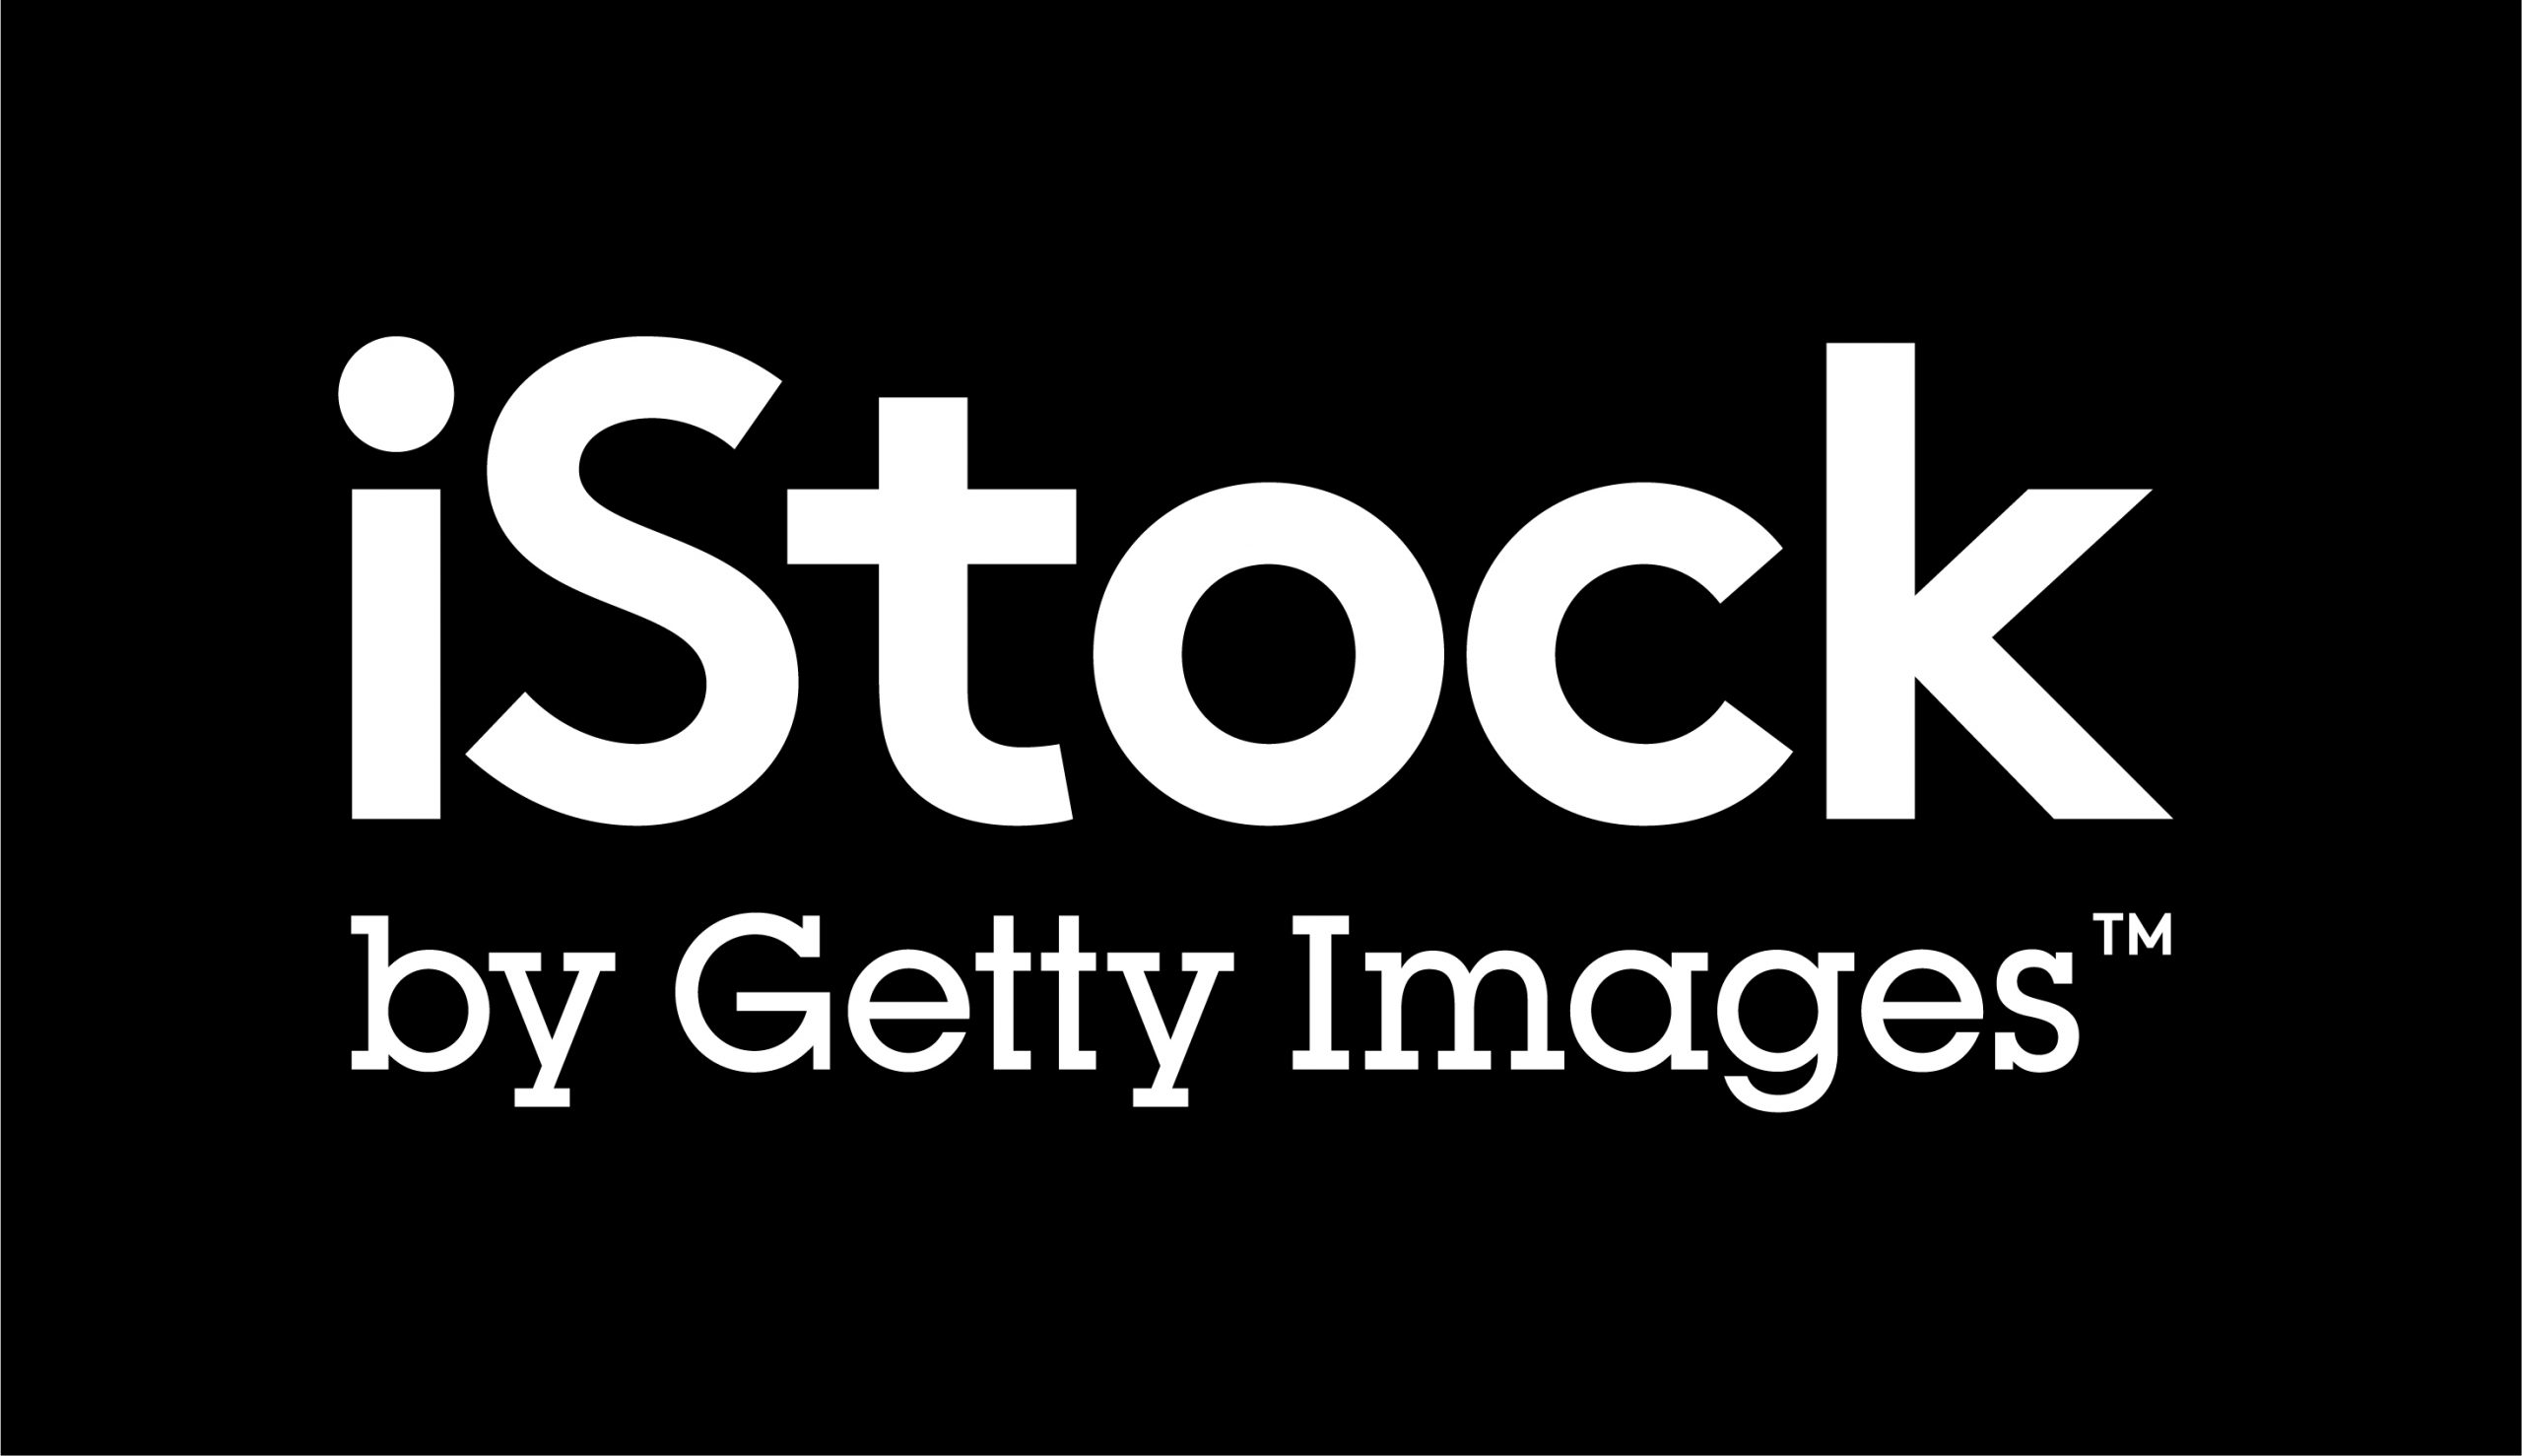 Overview of iStock